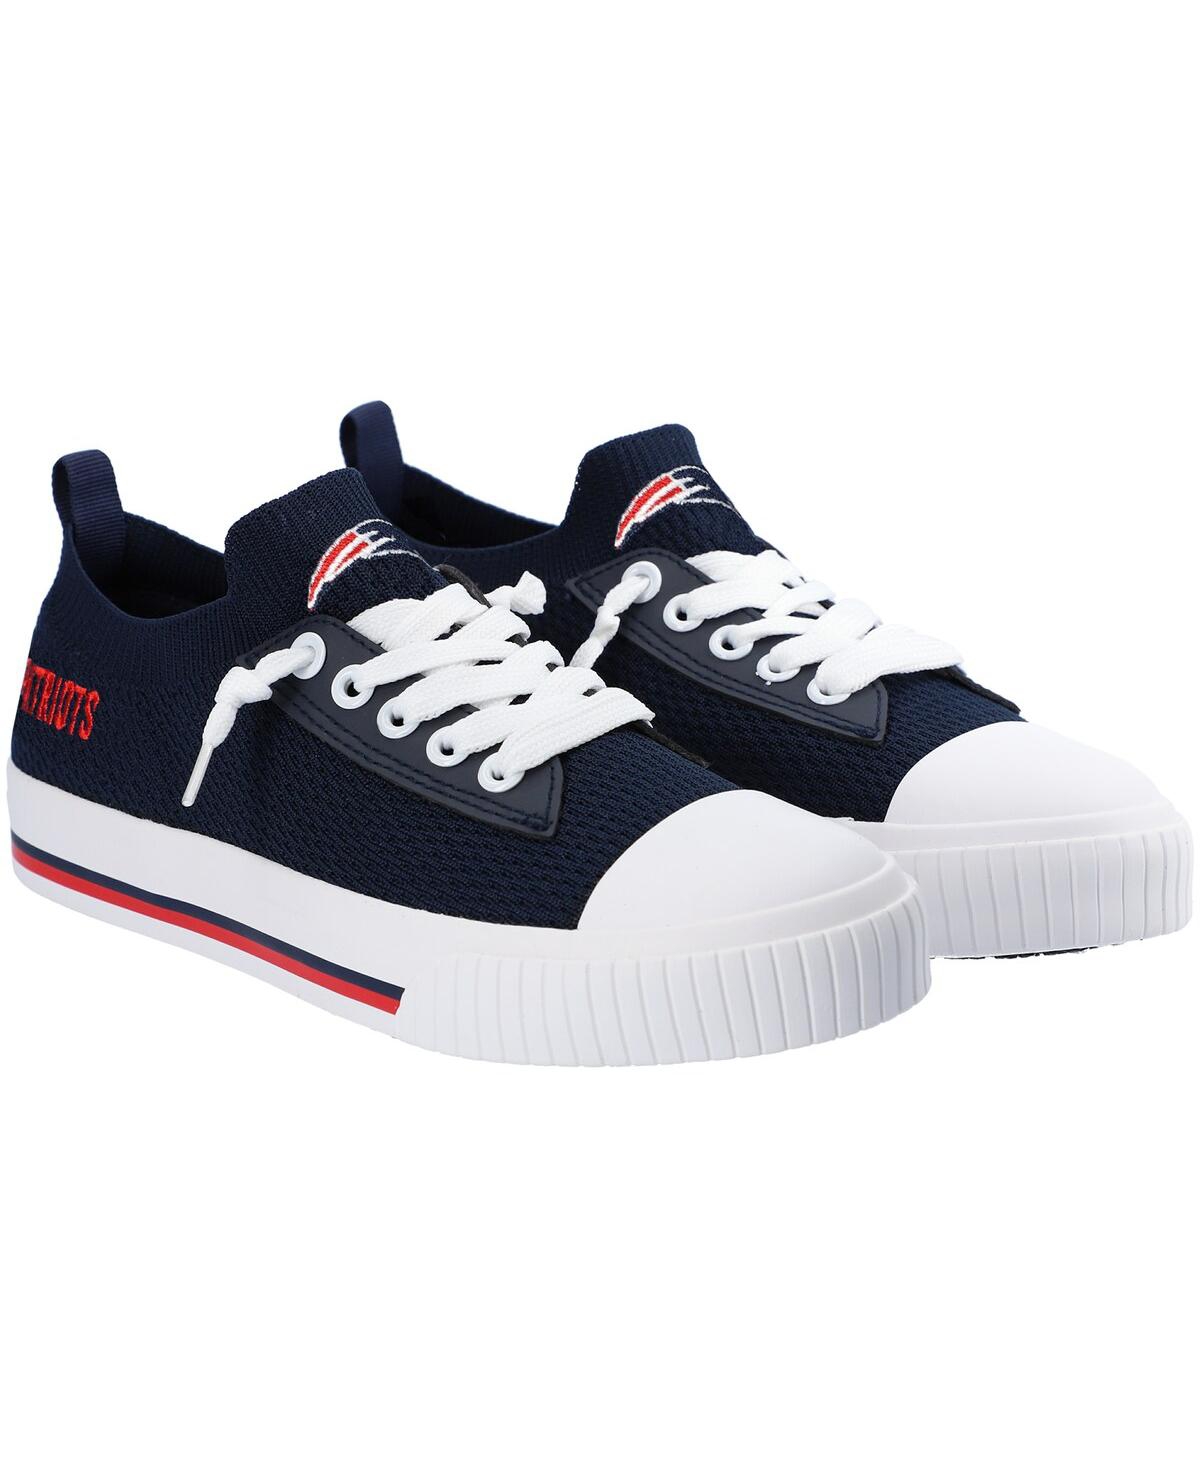 Women's Foco New England Patriots Knit Canvas Fashion Sneakers - Navy